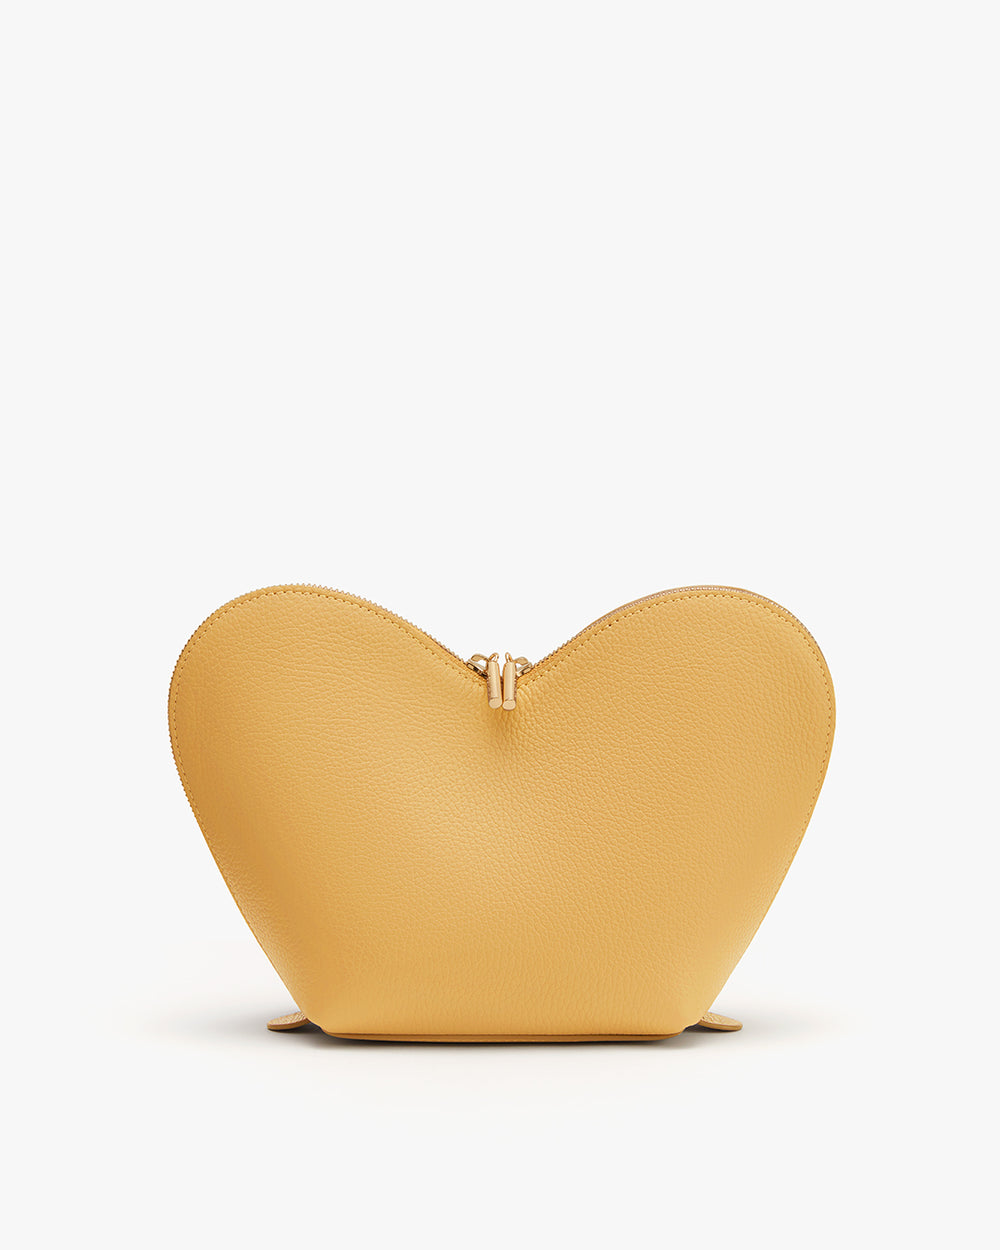 Heart-shaped purse standing upright on a flat surface.